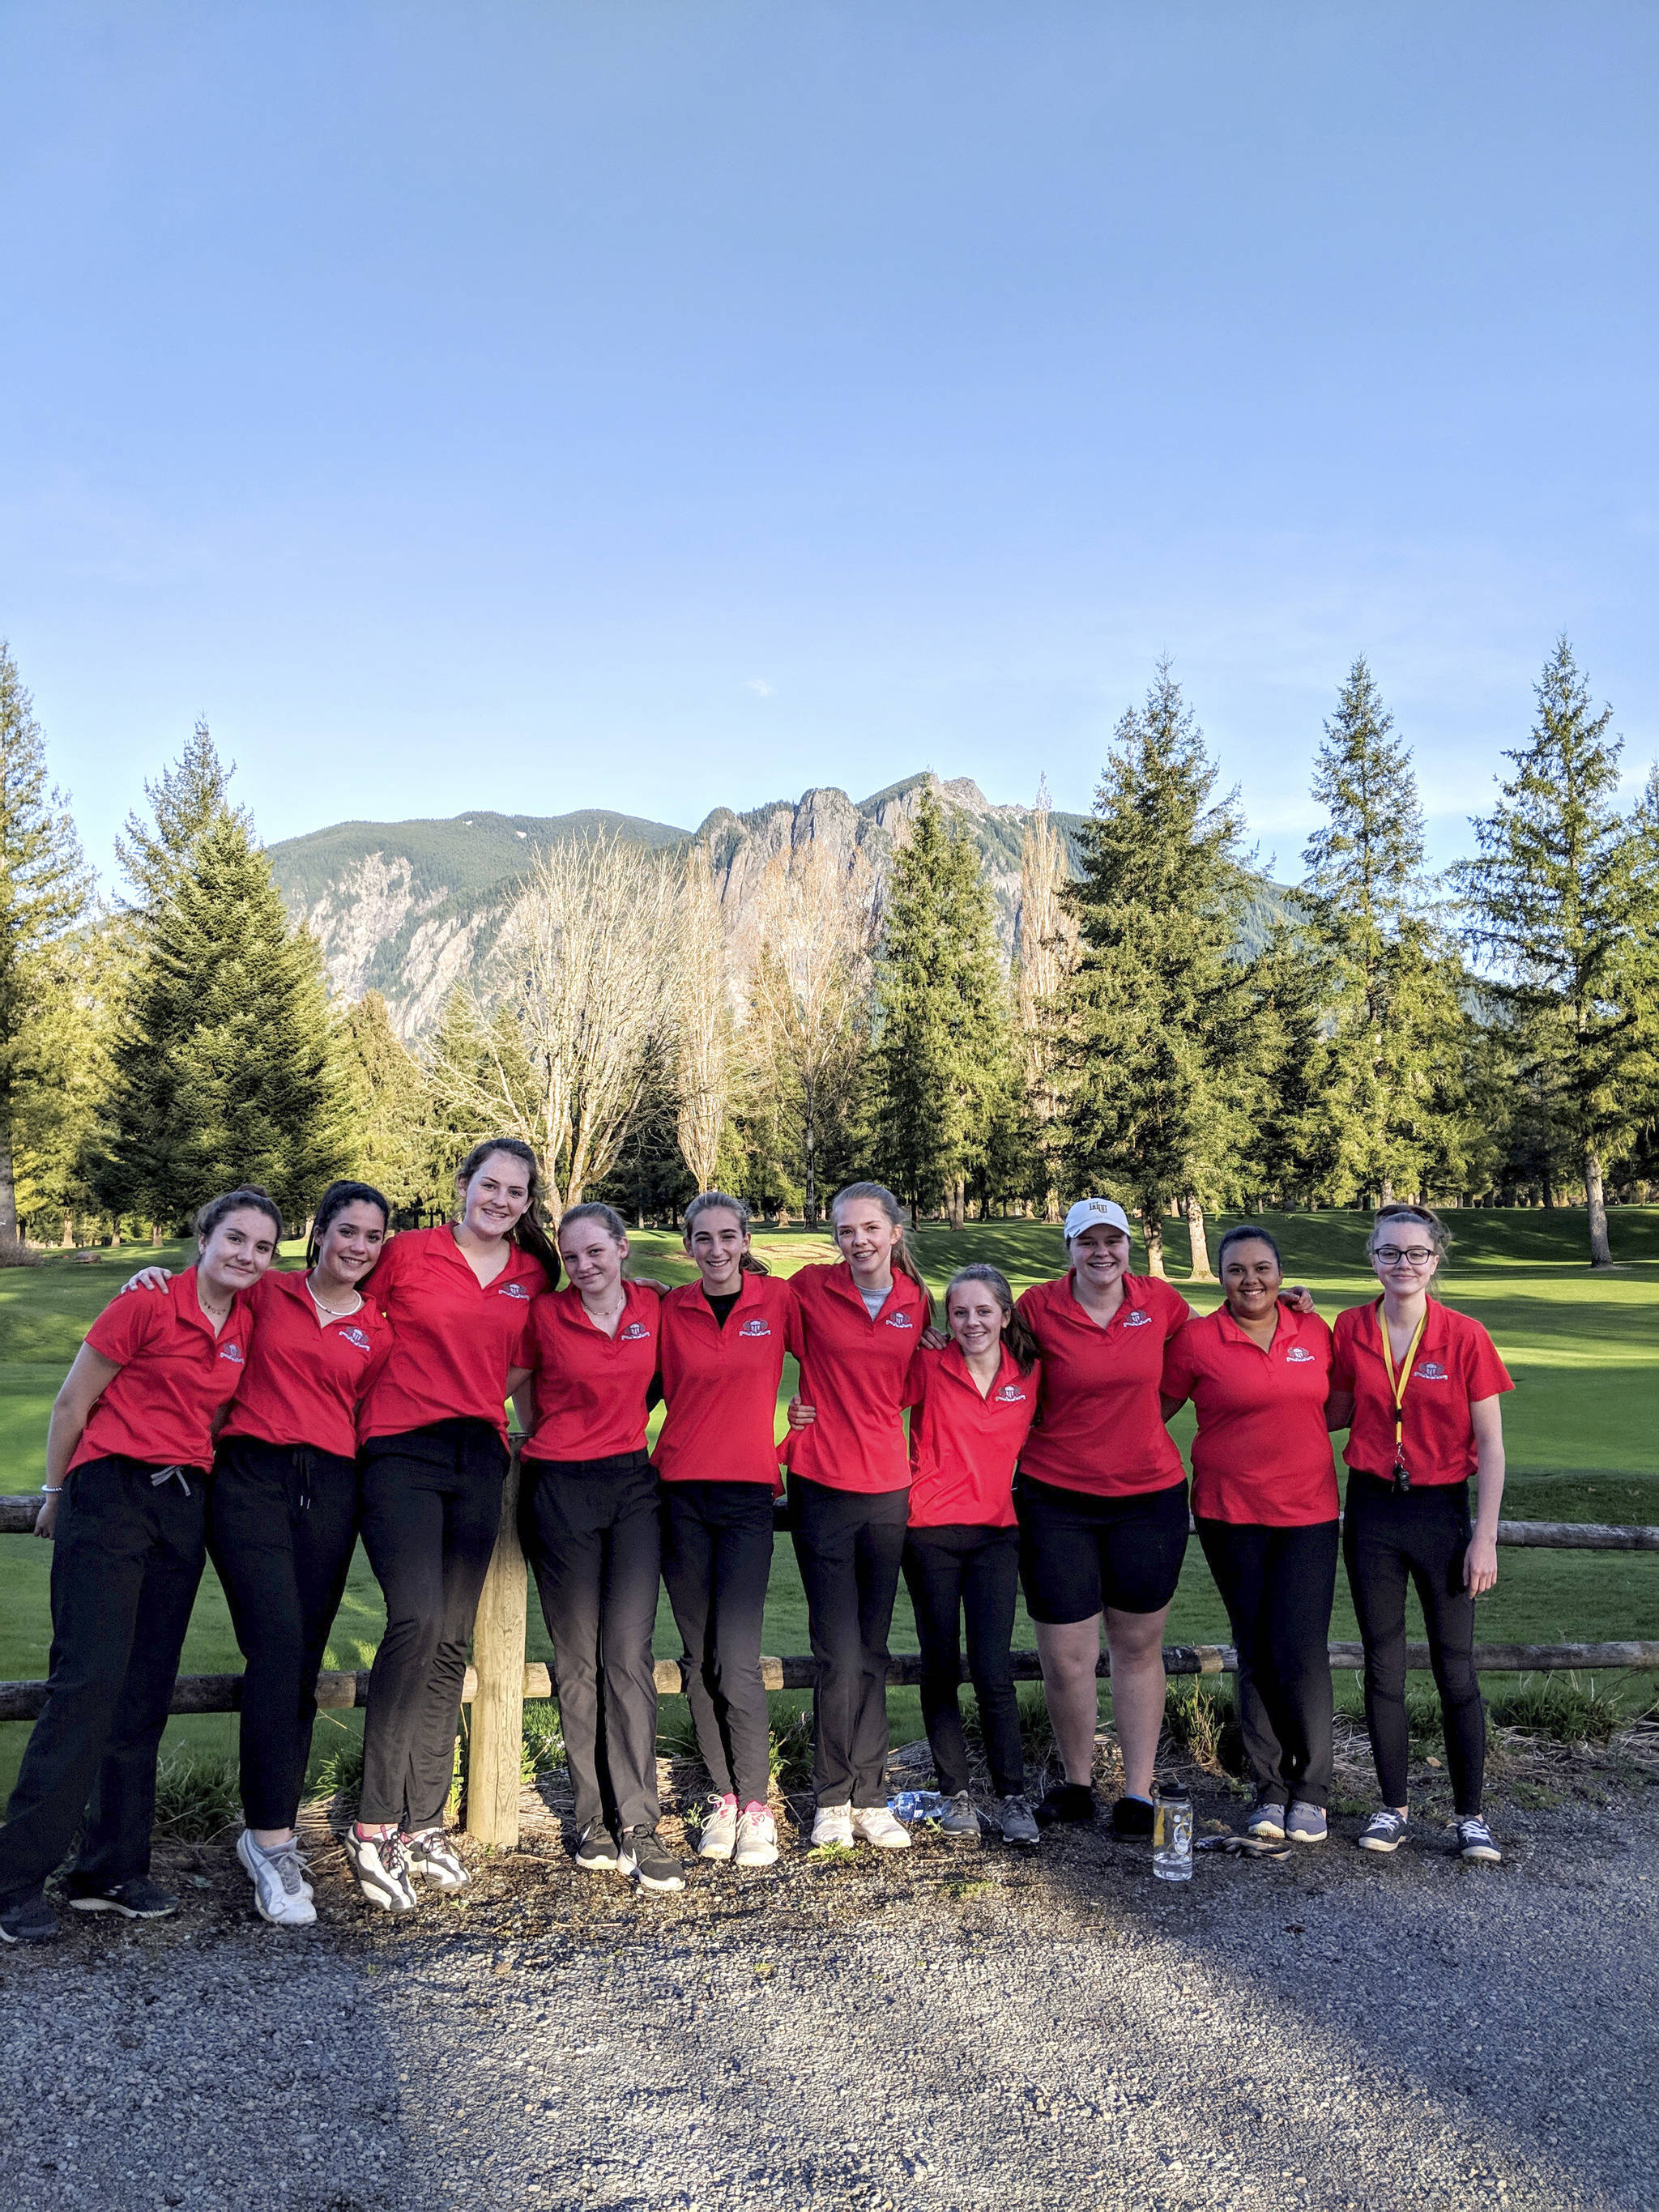 The Mount Si Wildcats girls golf team has an overall record of 5-1 through the first six matches of the 2019 season. Photo courtesy of Stephen Botulinski